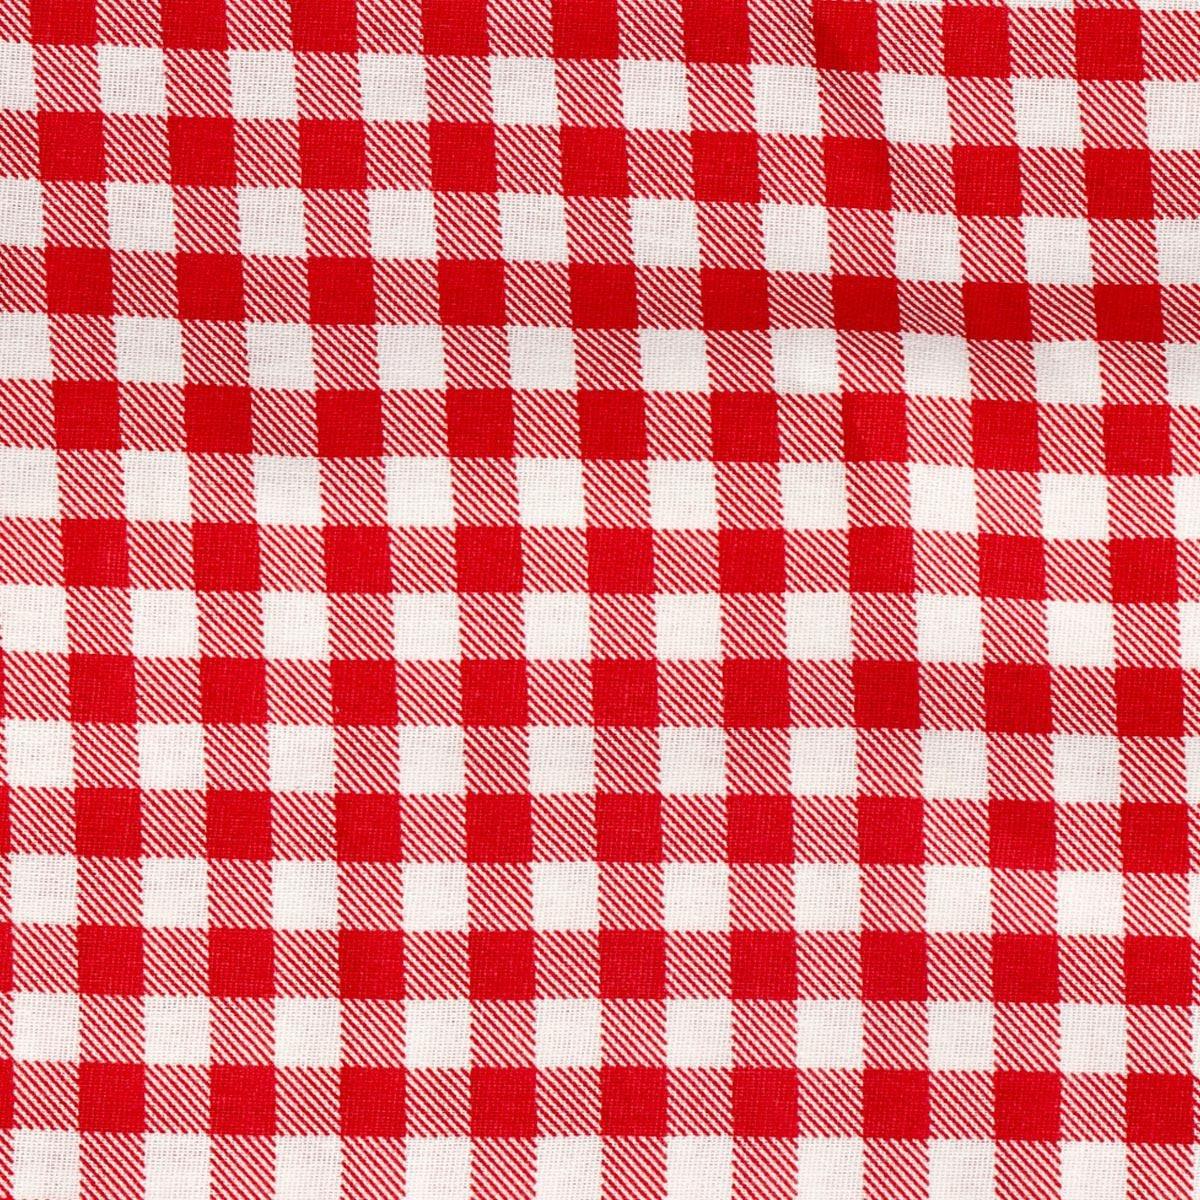 Red tablecloth. 140x220 cm